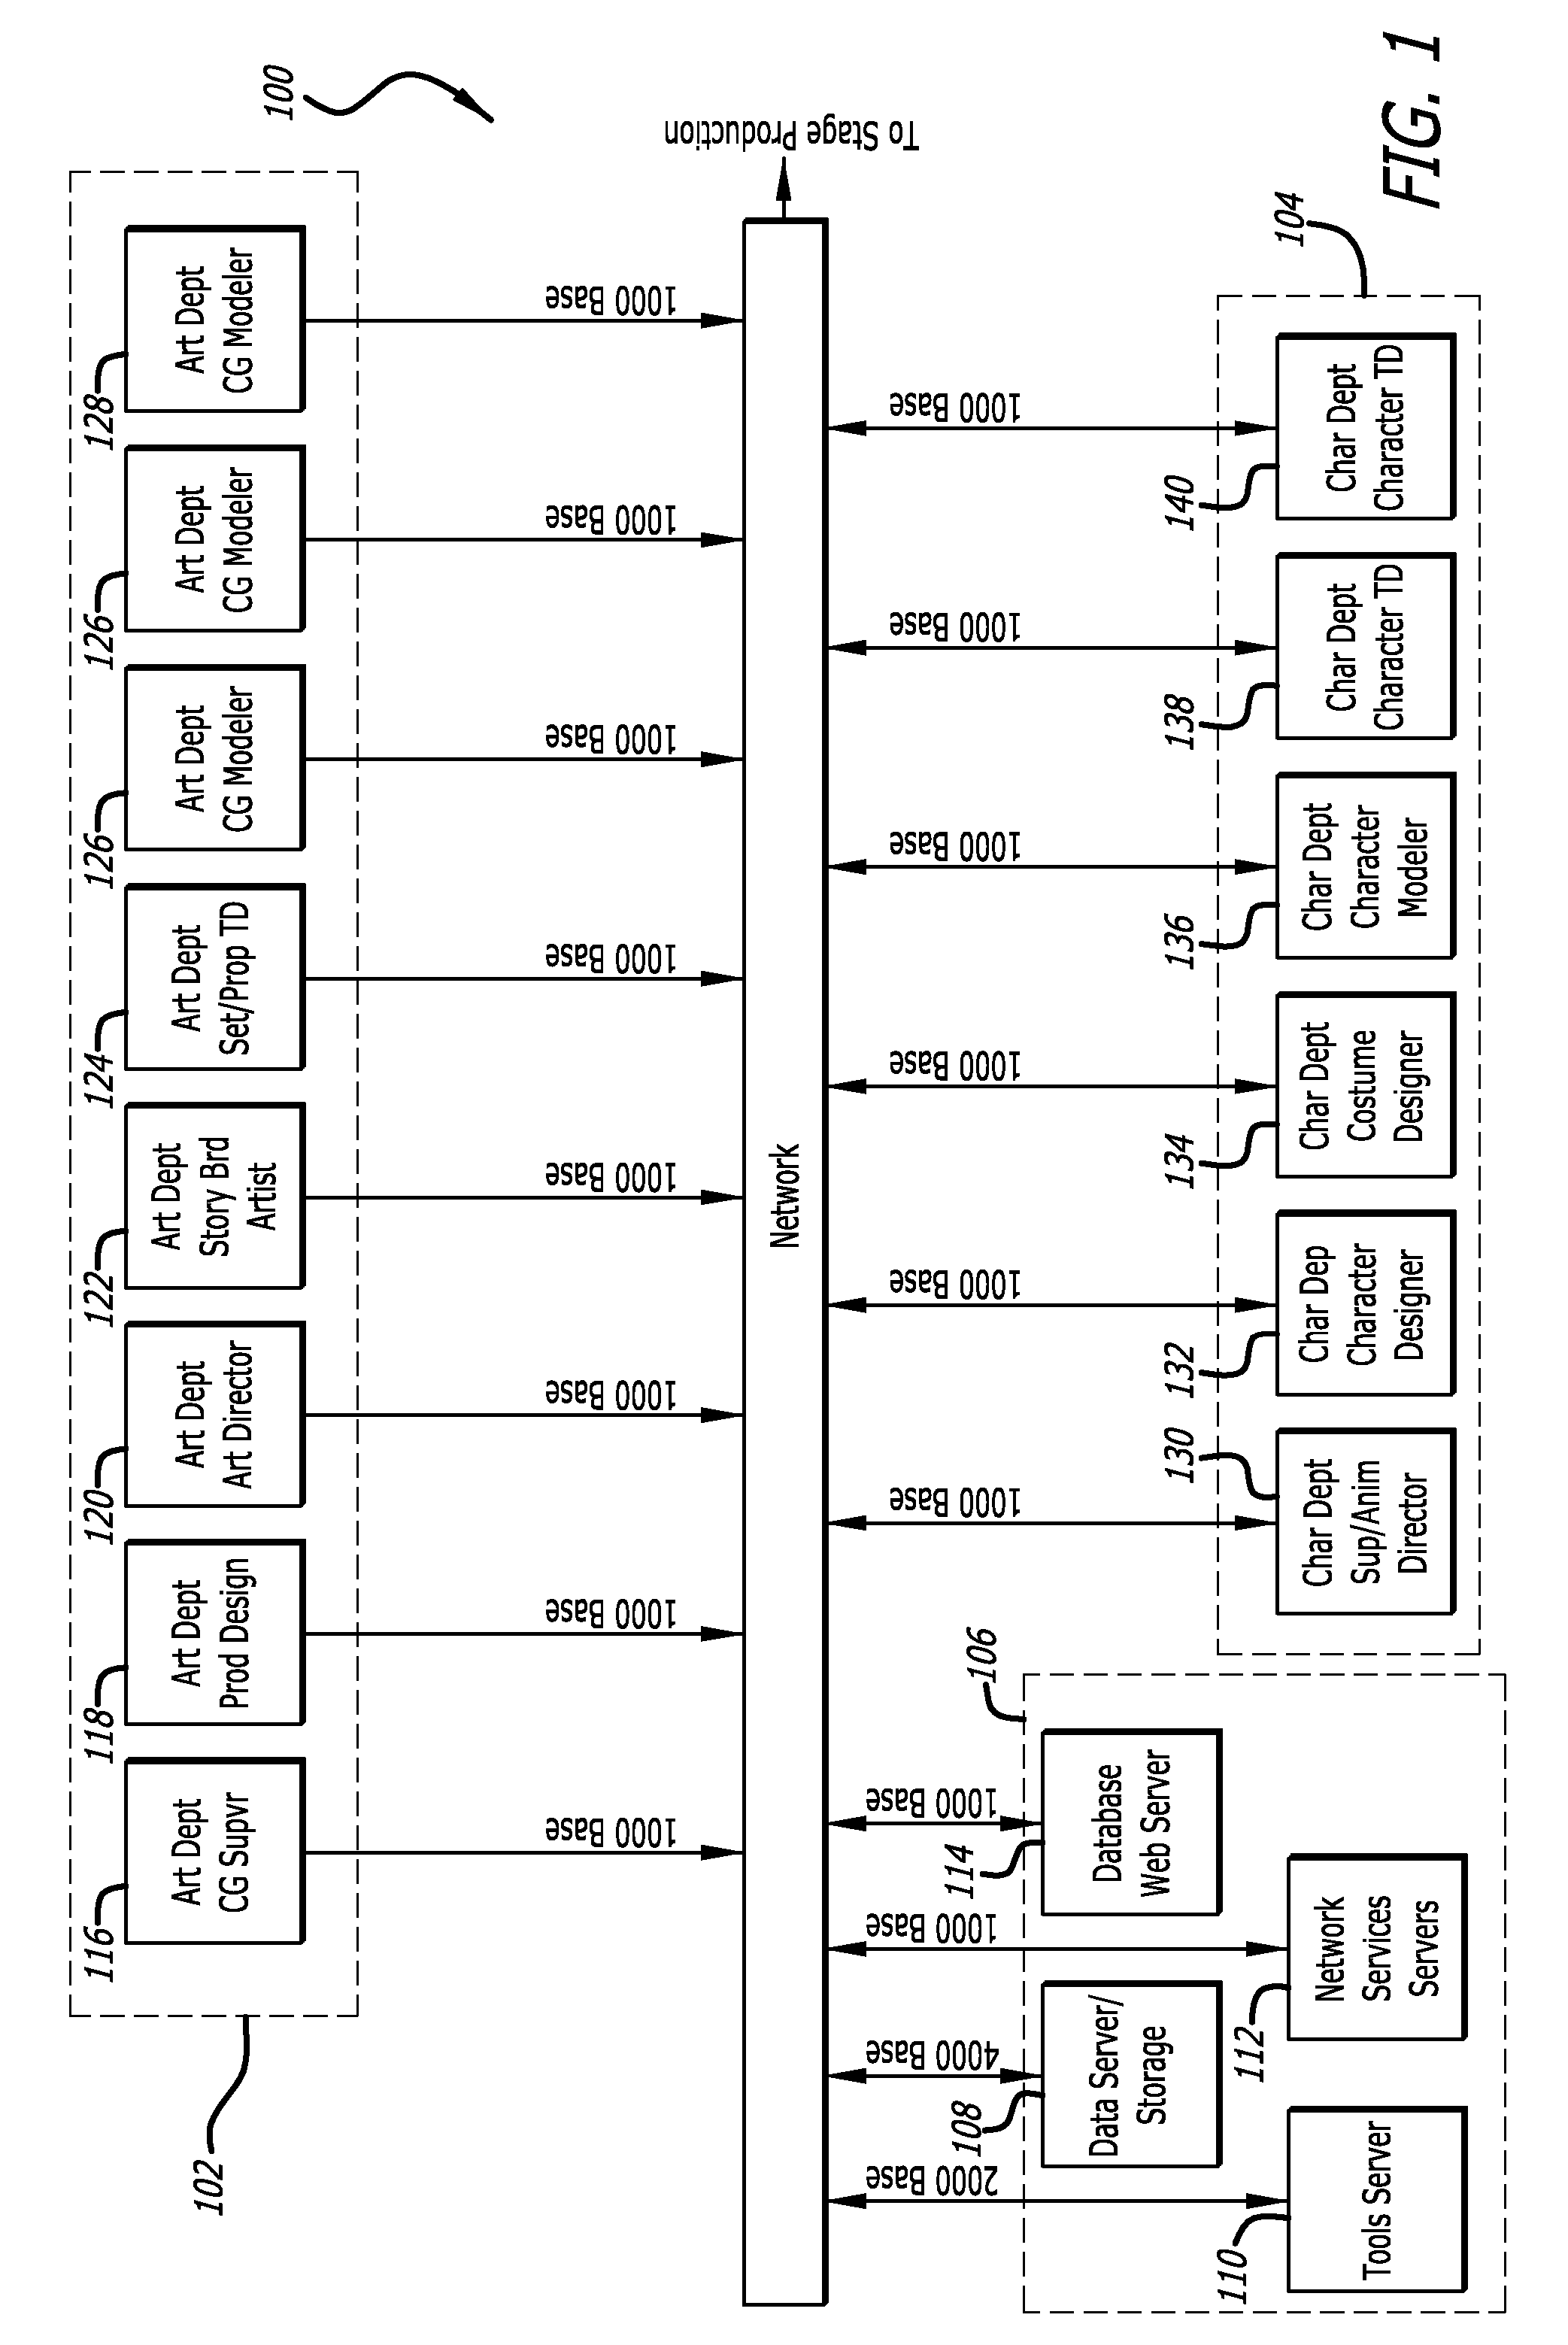 System and method of producing an animated performance utilizing multiple cameras